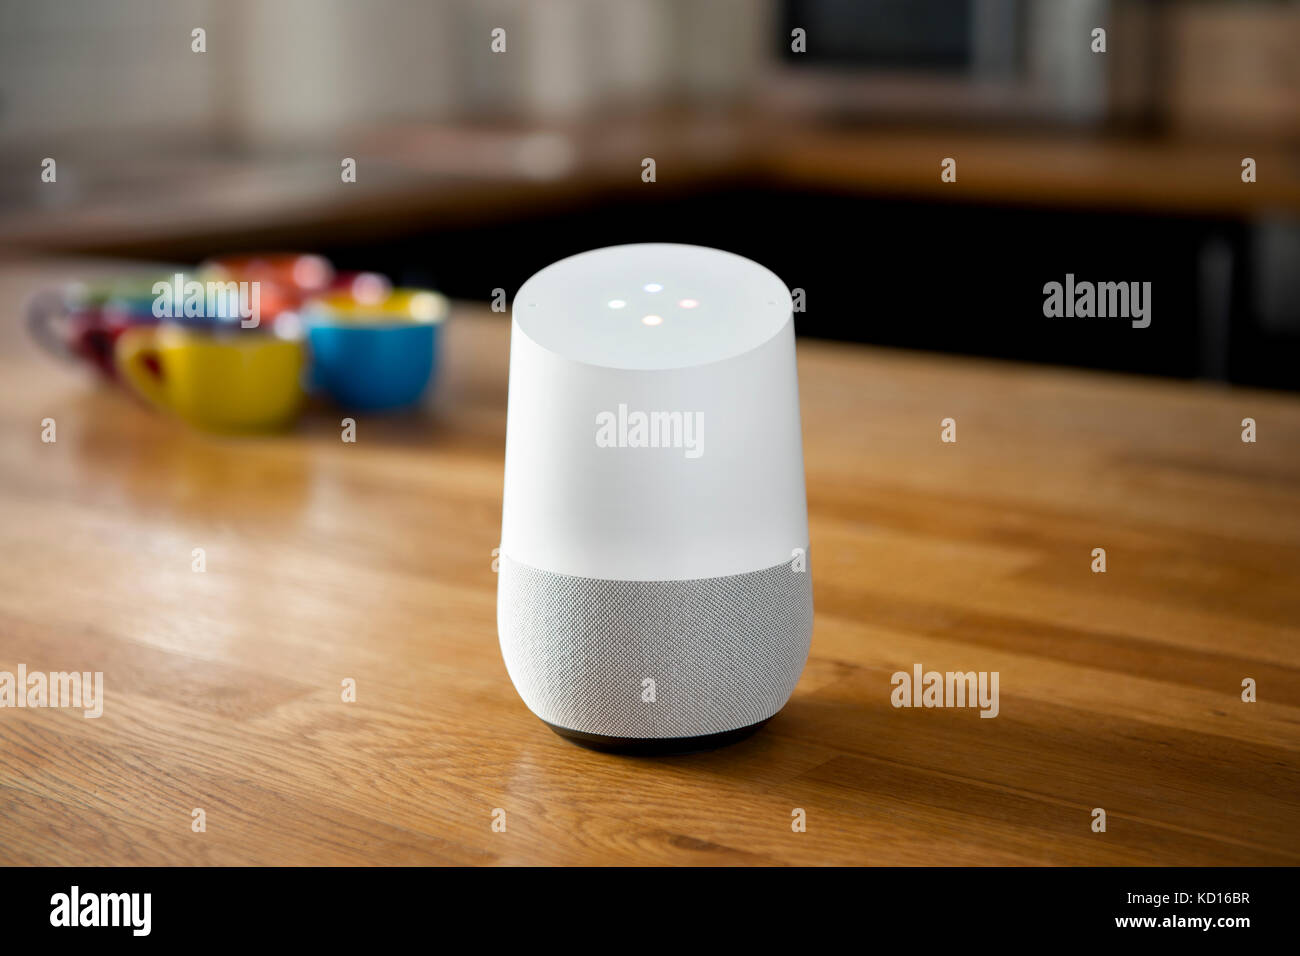 The 2016 release Google Home smart speaker and intelligent personal assistant device shot in a domestic environment (Editorial use only). Stock Photo